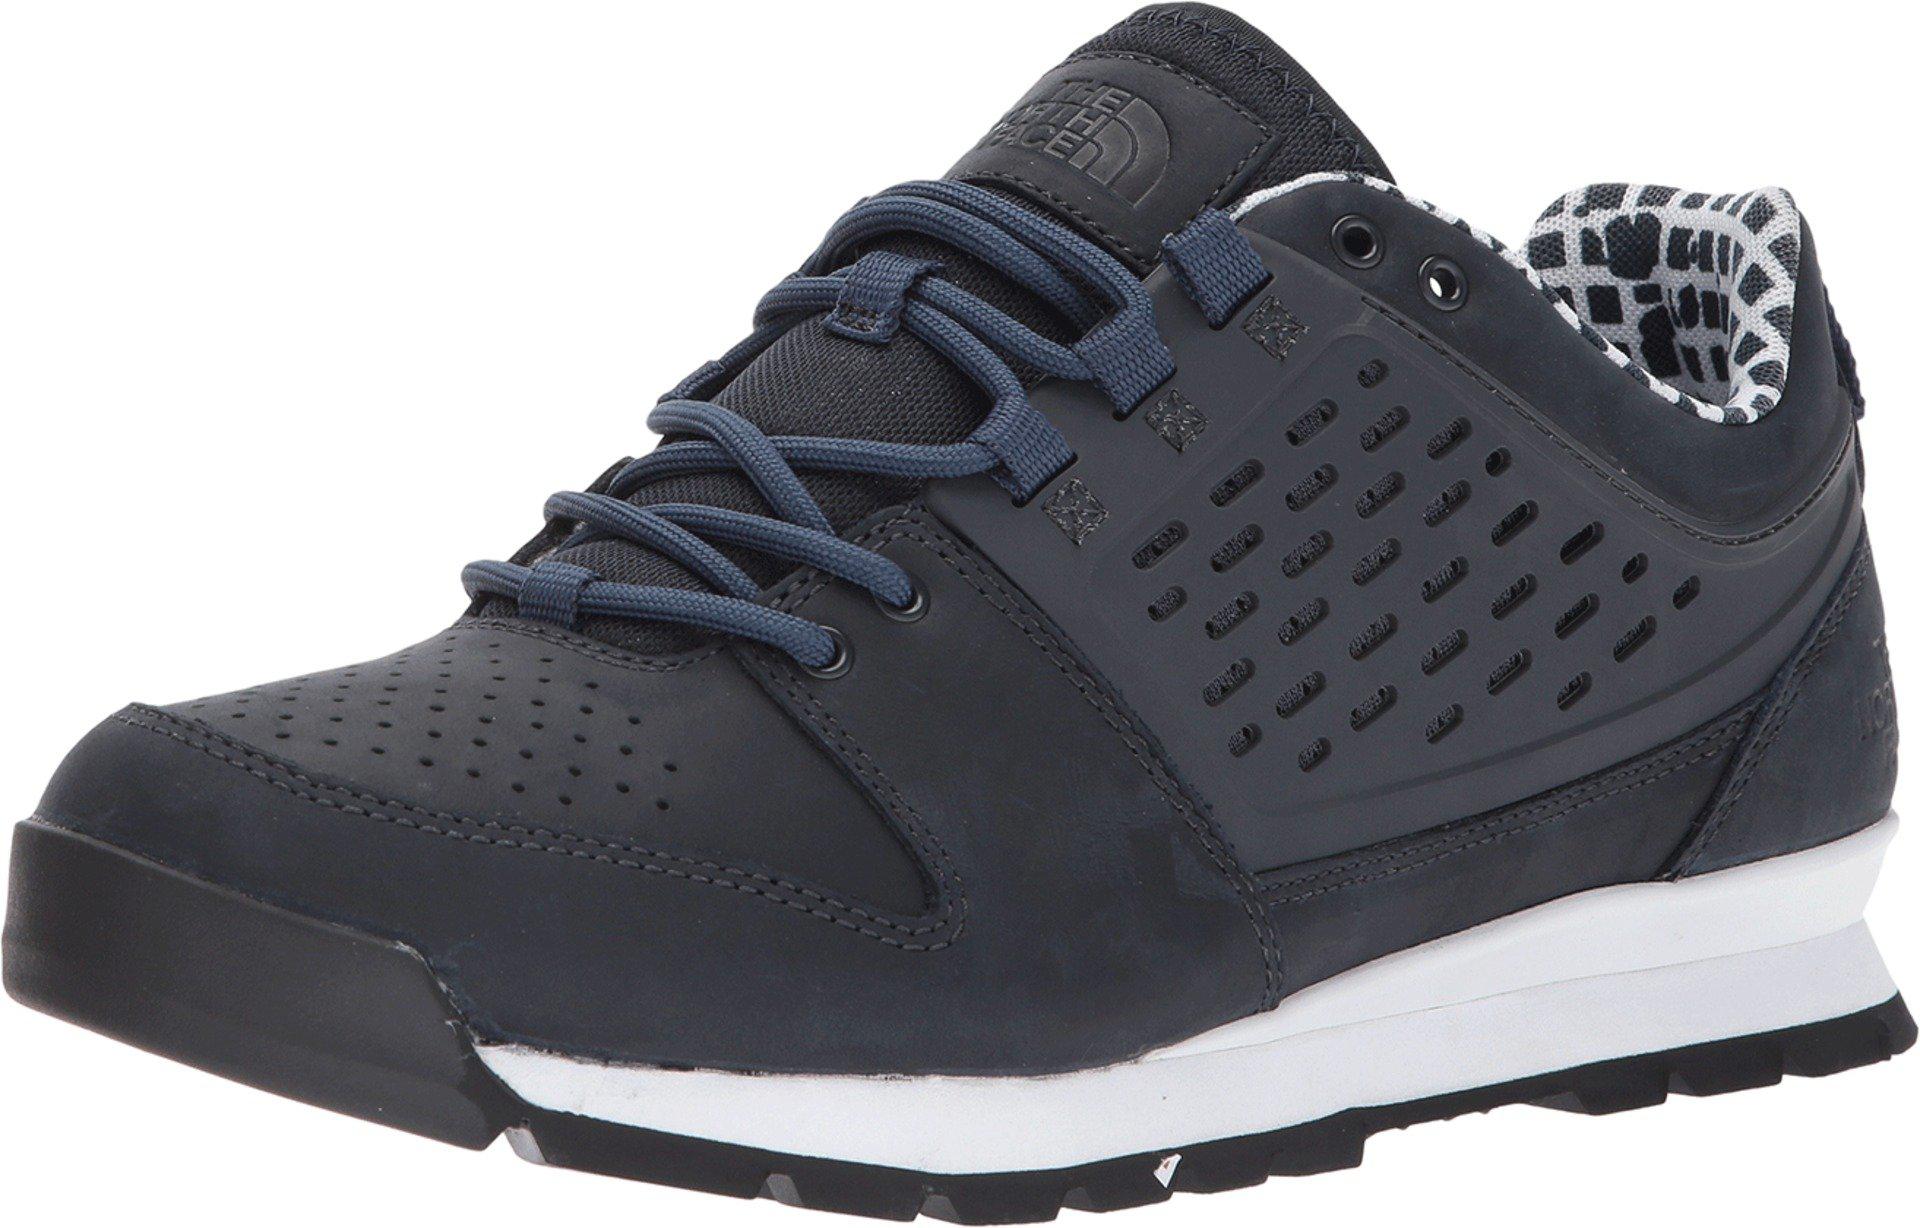 the north face men's back to berkeley redux 88 hiking shoes